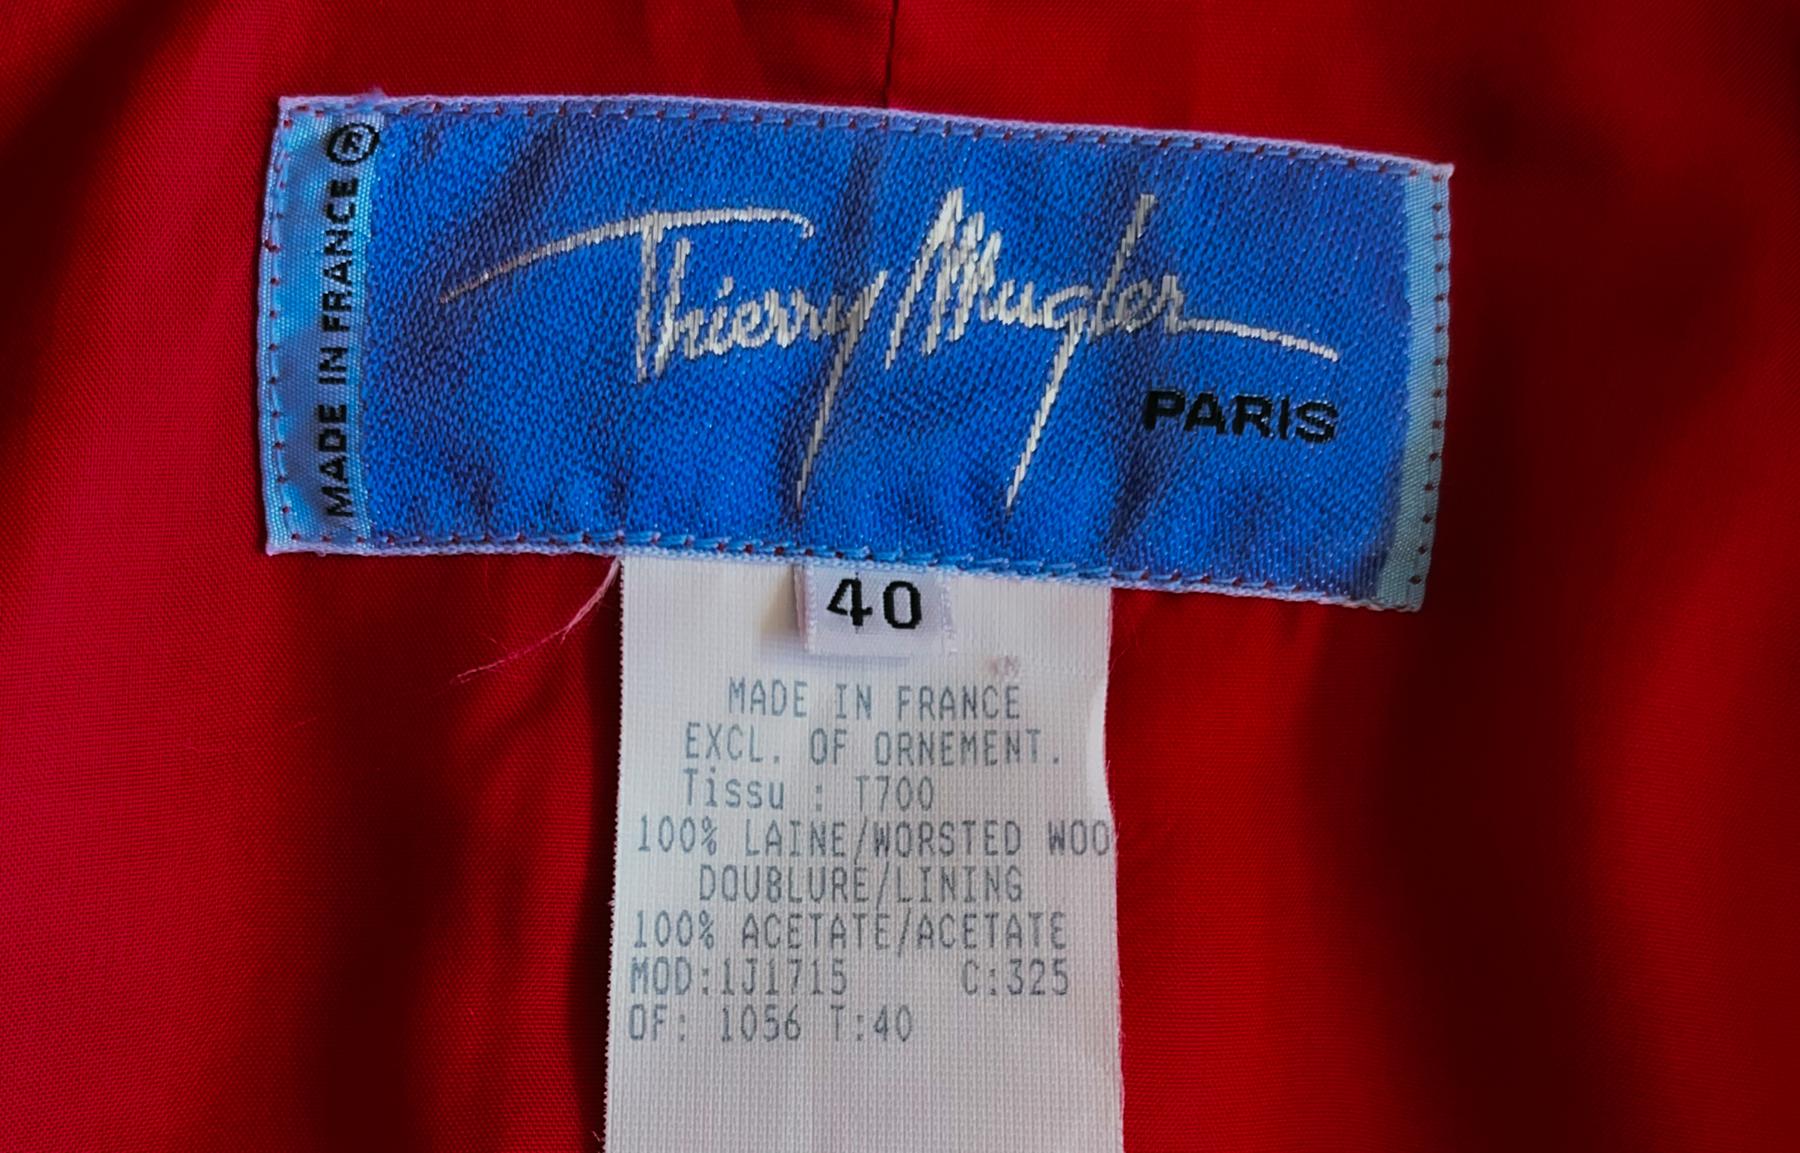 
Stunning Thierry Mugler jacket, Fall Winter 1995 Collection. Masterful construction, a fabulous Thierry Mugler creation. Vibrant tomatoe red colour. Silver coloured metal buttons.
Extraordinairy shape! Feminine silhouette with fitted waist and